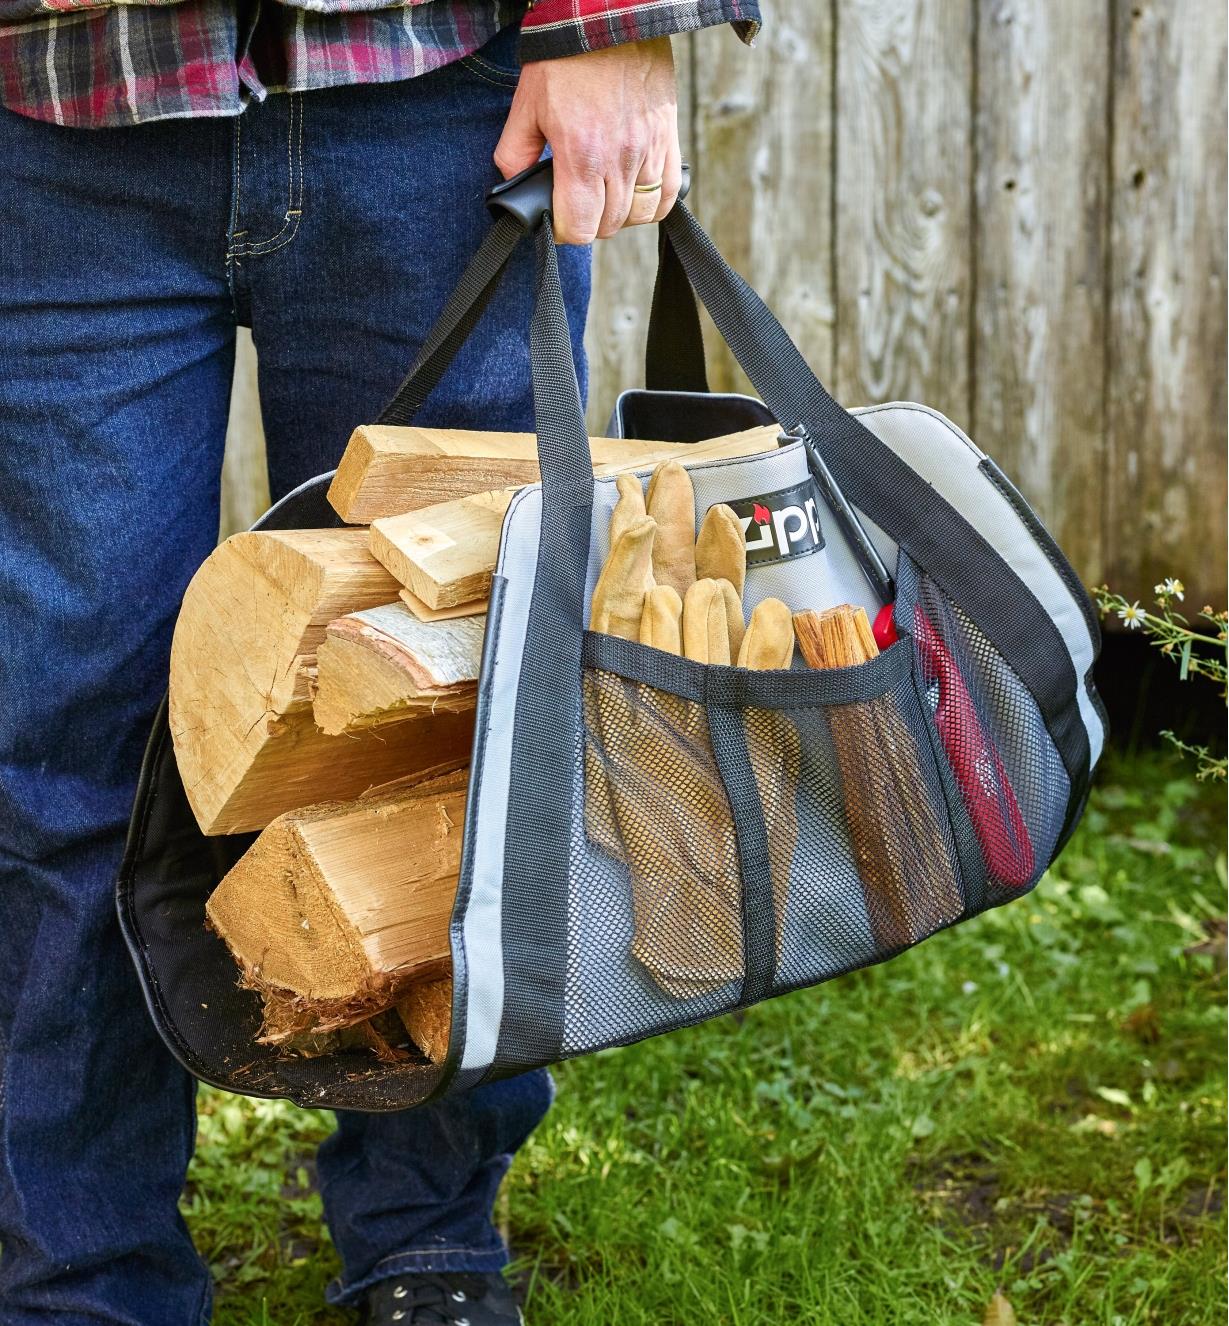 Carrying firewood in the campfire carrier, with work gloves, fire starters and a lighter in the side pocket